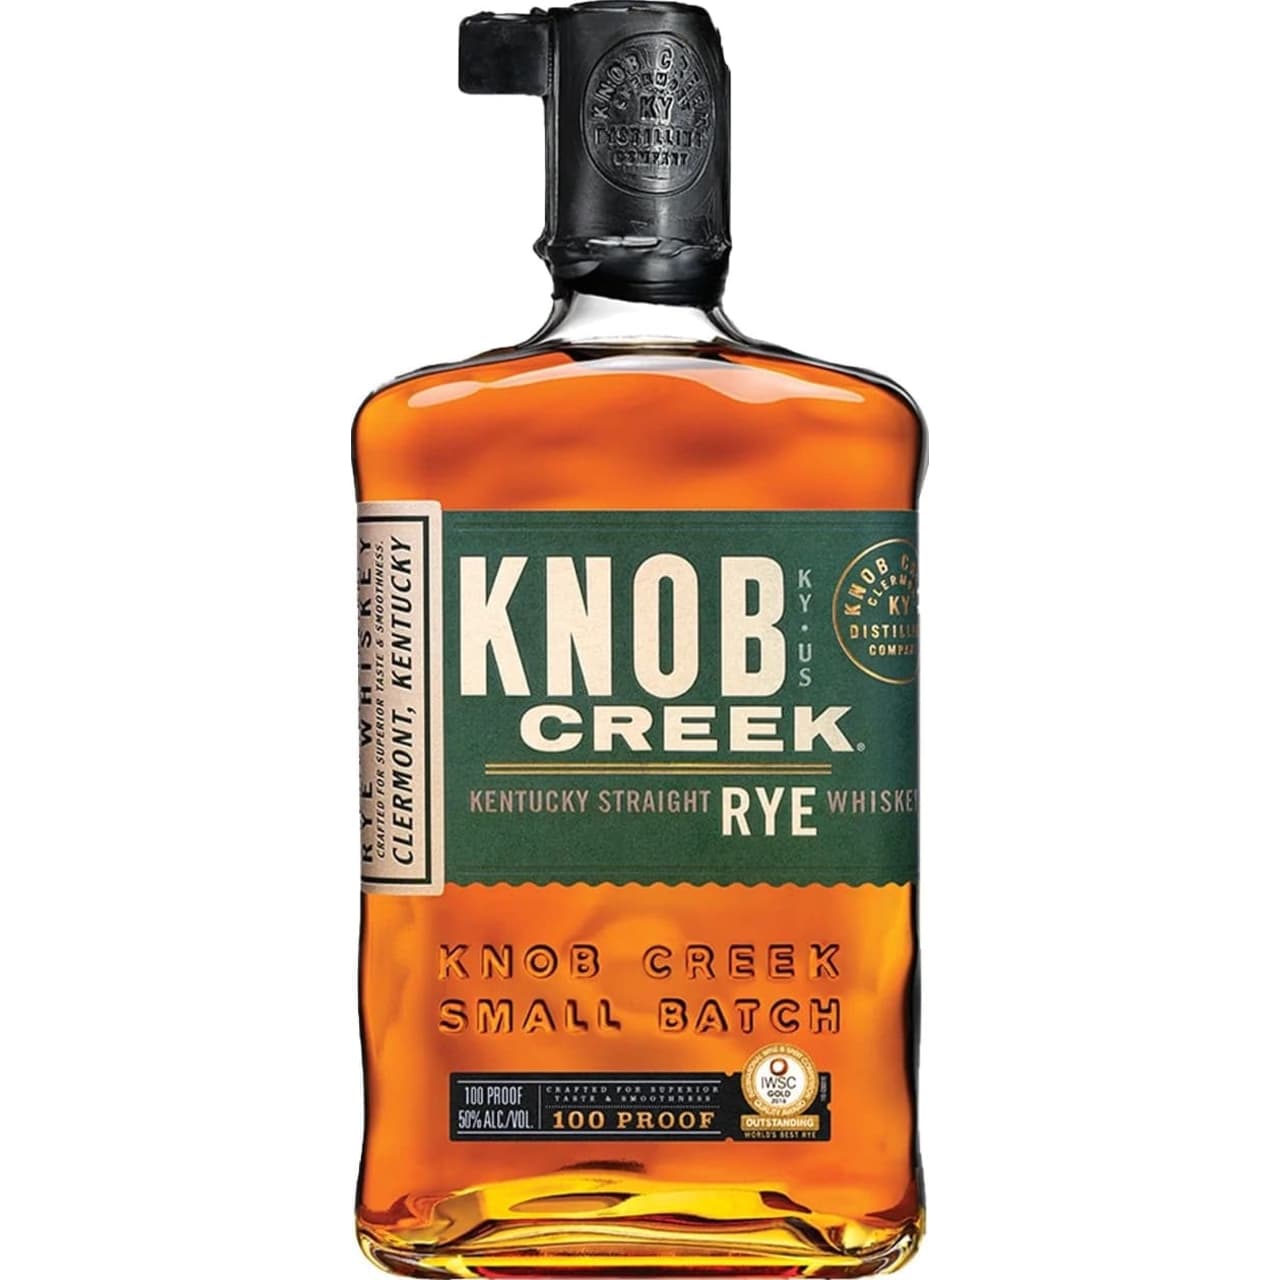 Made with a blend of fine quality rye to create an extraordinarily smooth yet spicy finish; handcrafted and aged to produce the signature rich flavor.